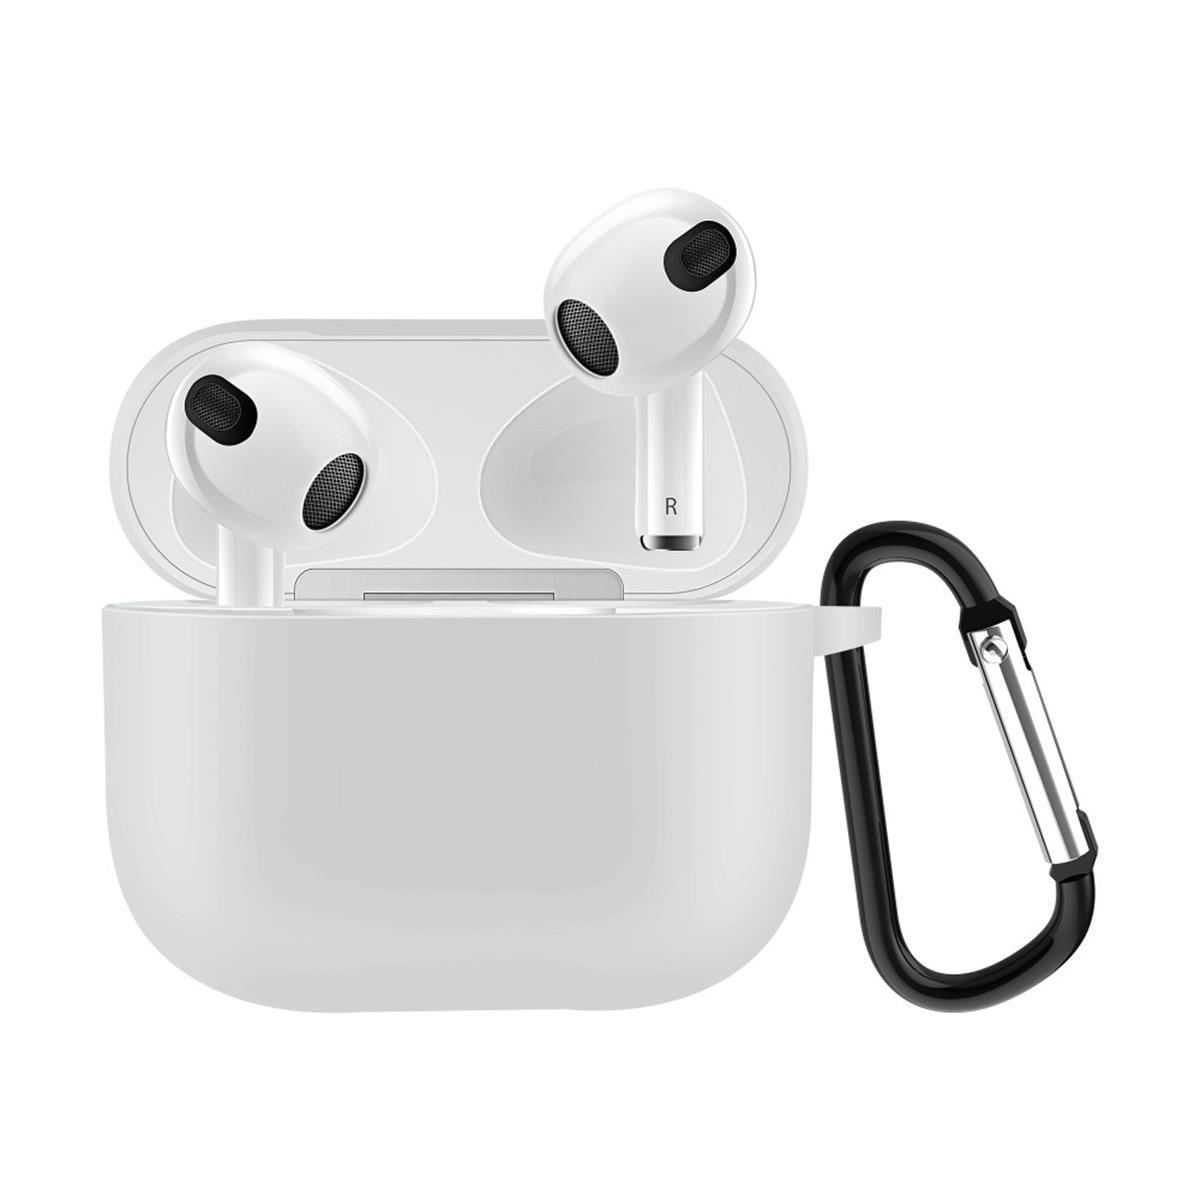 COVERKINGZ Silikoncover Ladecase für Apple AirPods Unisex, Weiß, 76801 3